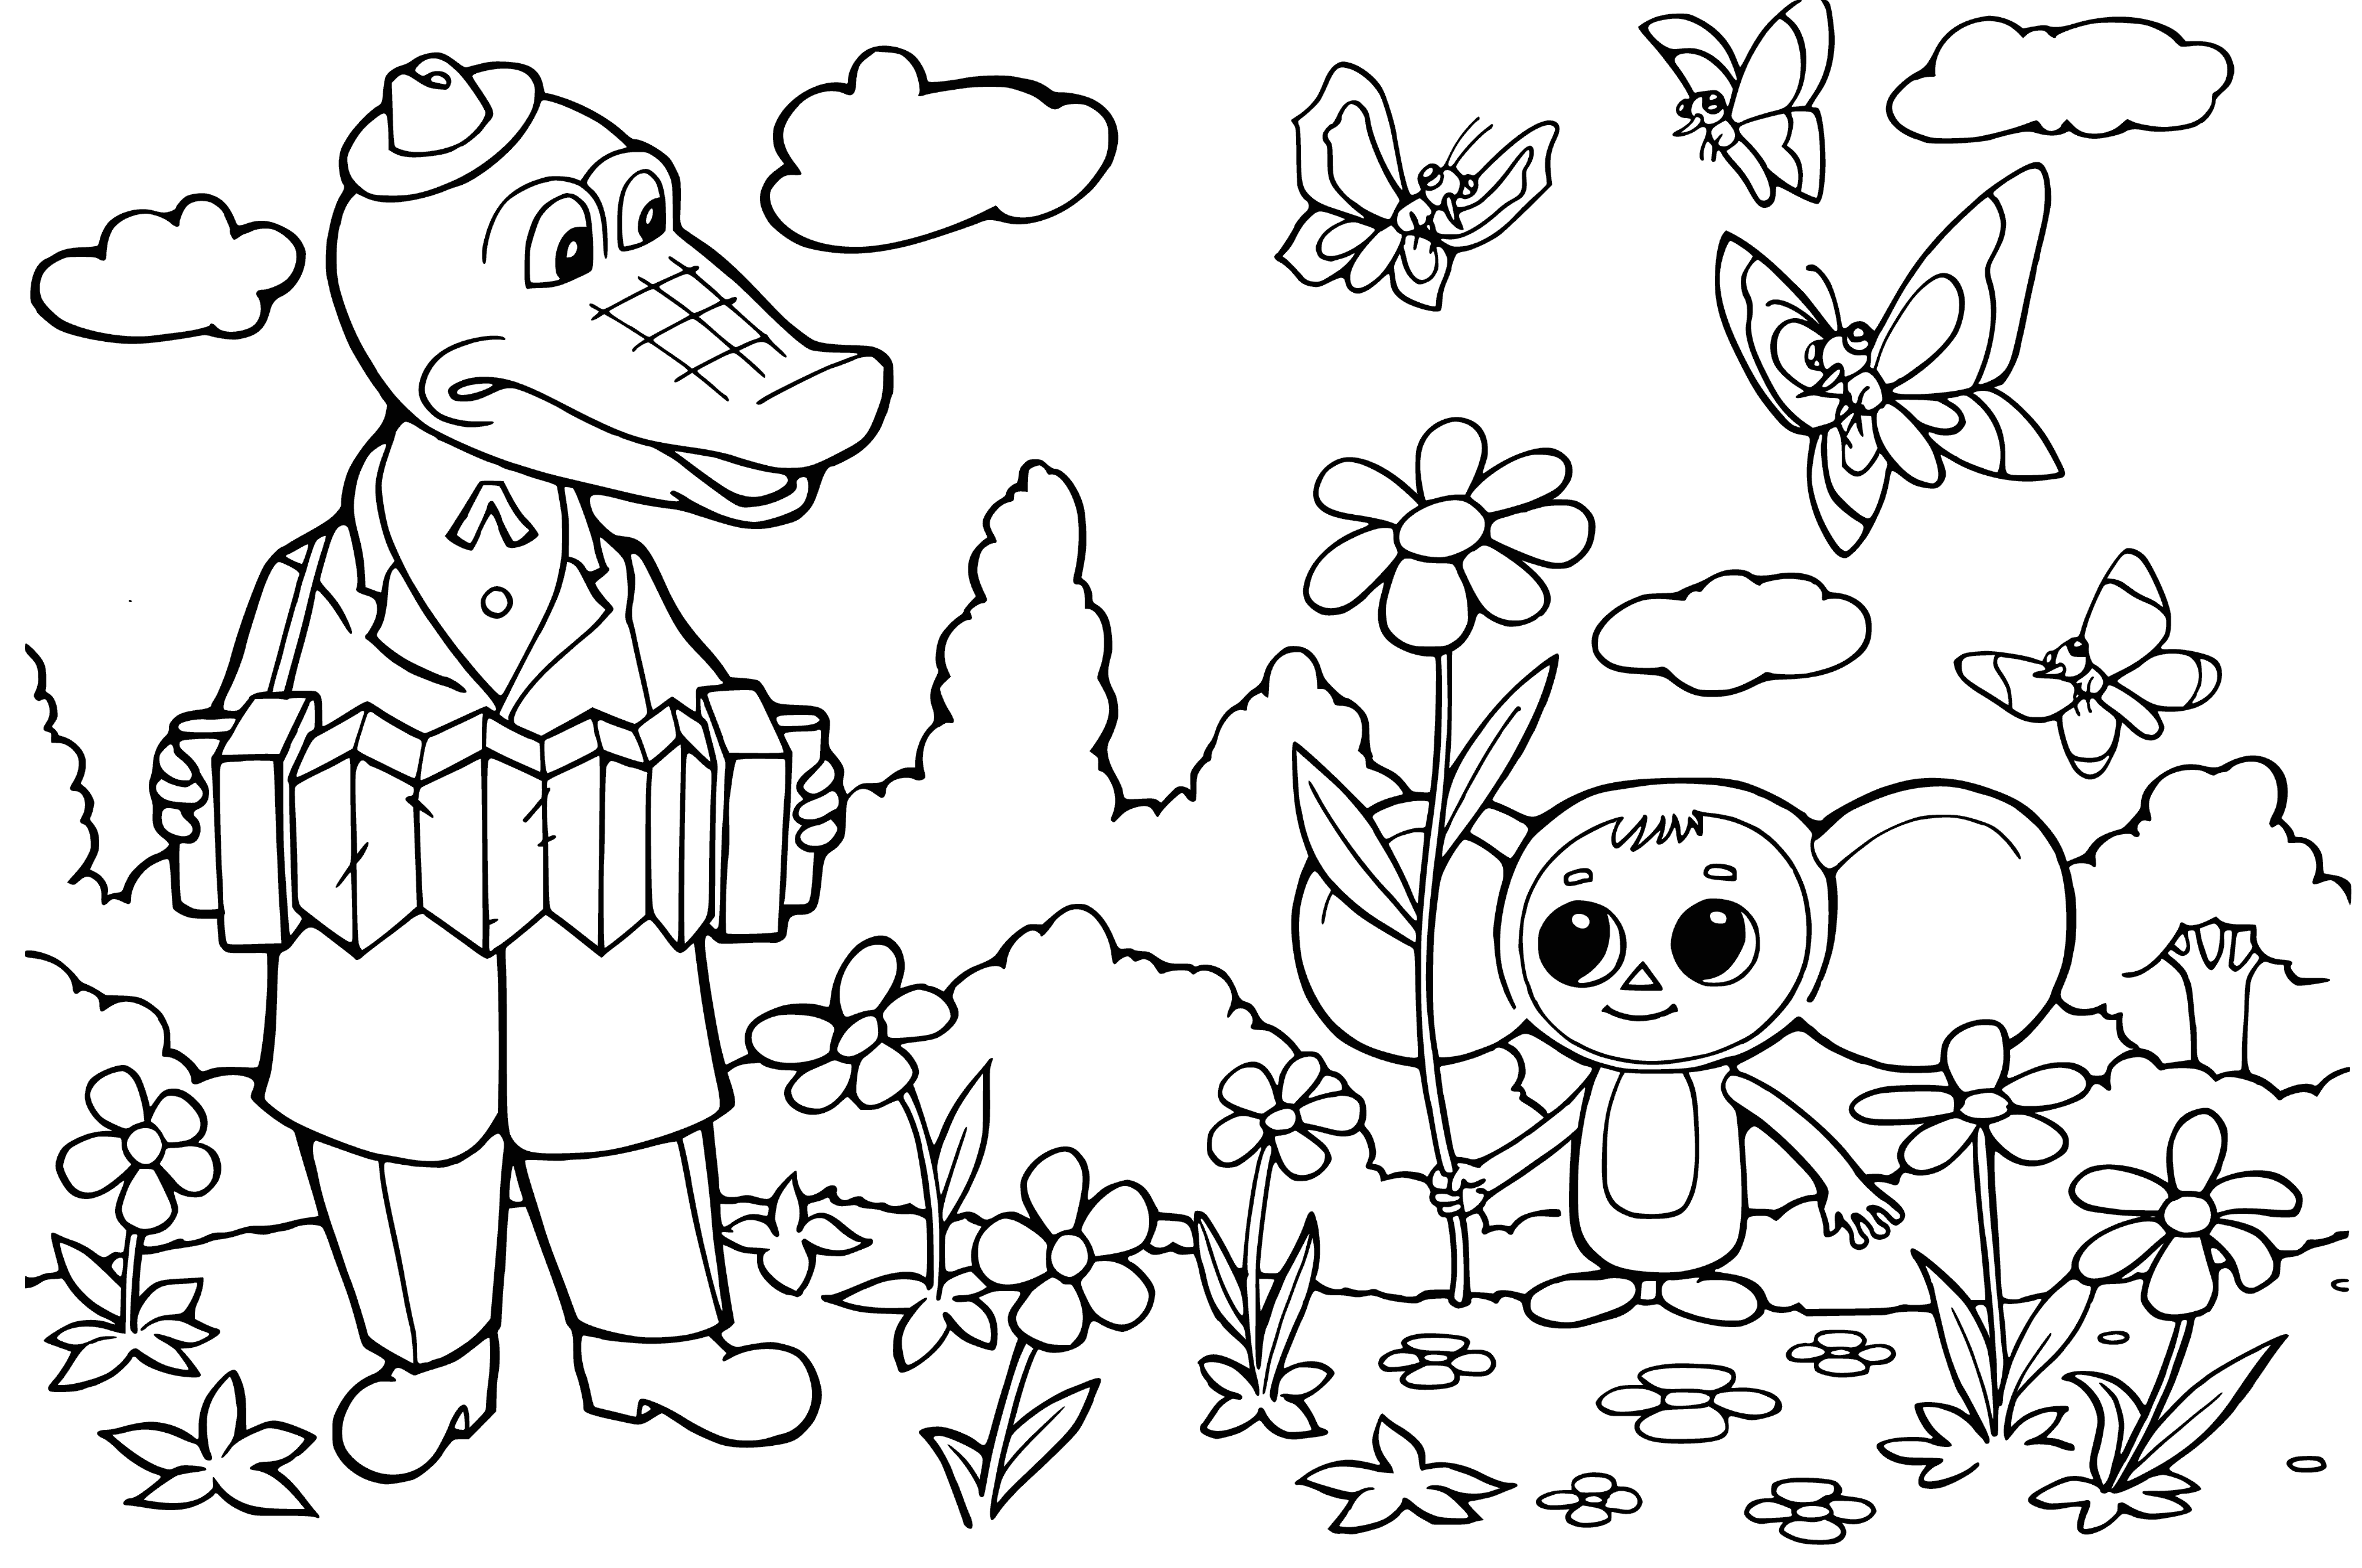 A large crocodile and a small creature face off on a coloring page. The creature looks fearlessly at the croc, its big ears and long tail on display.